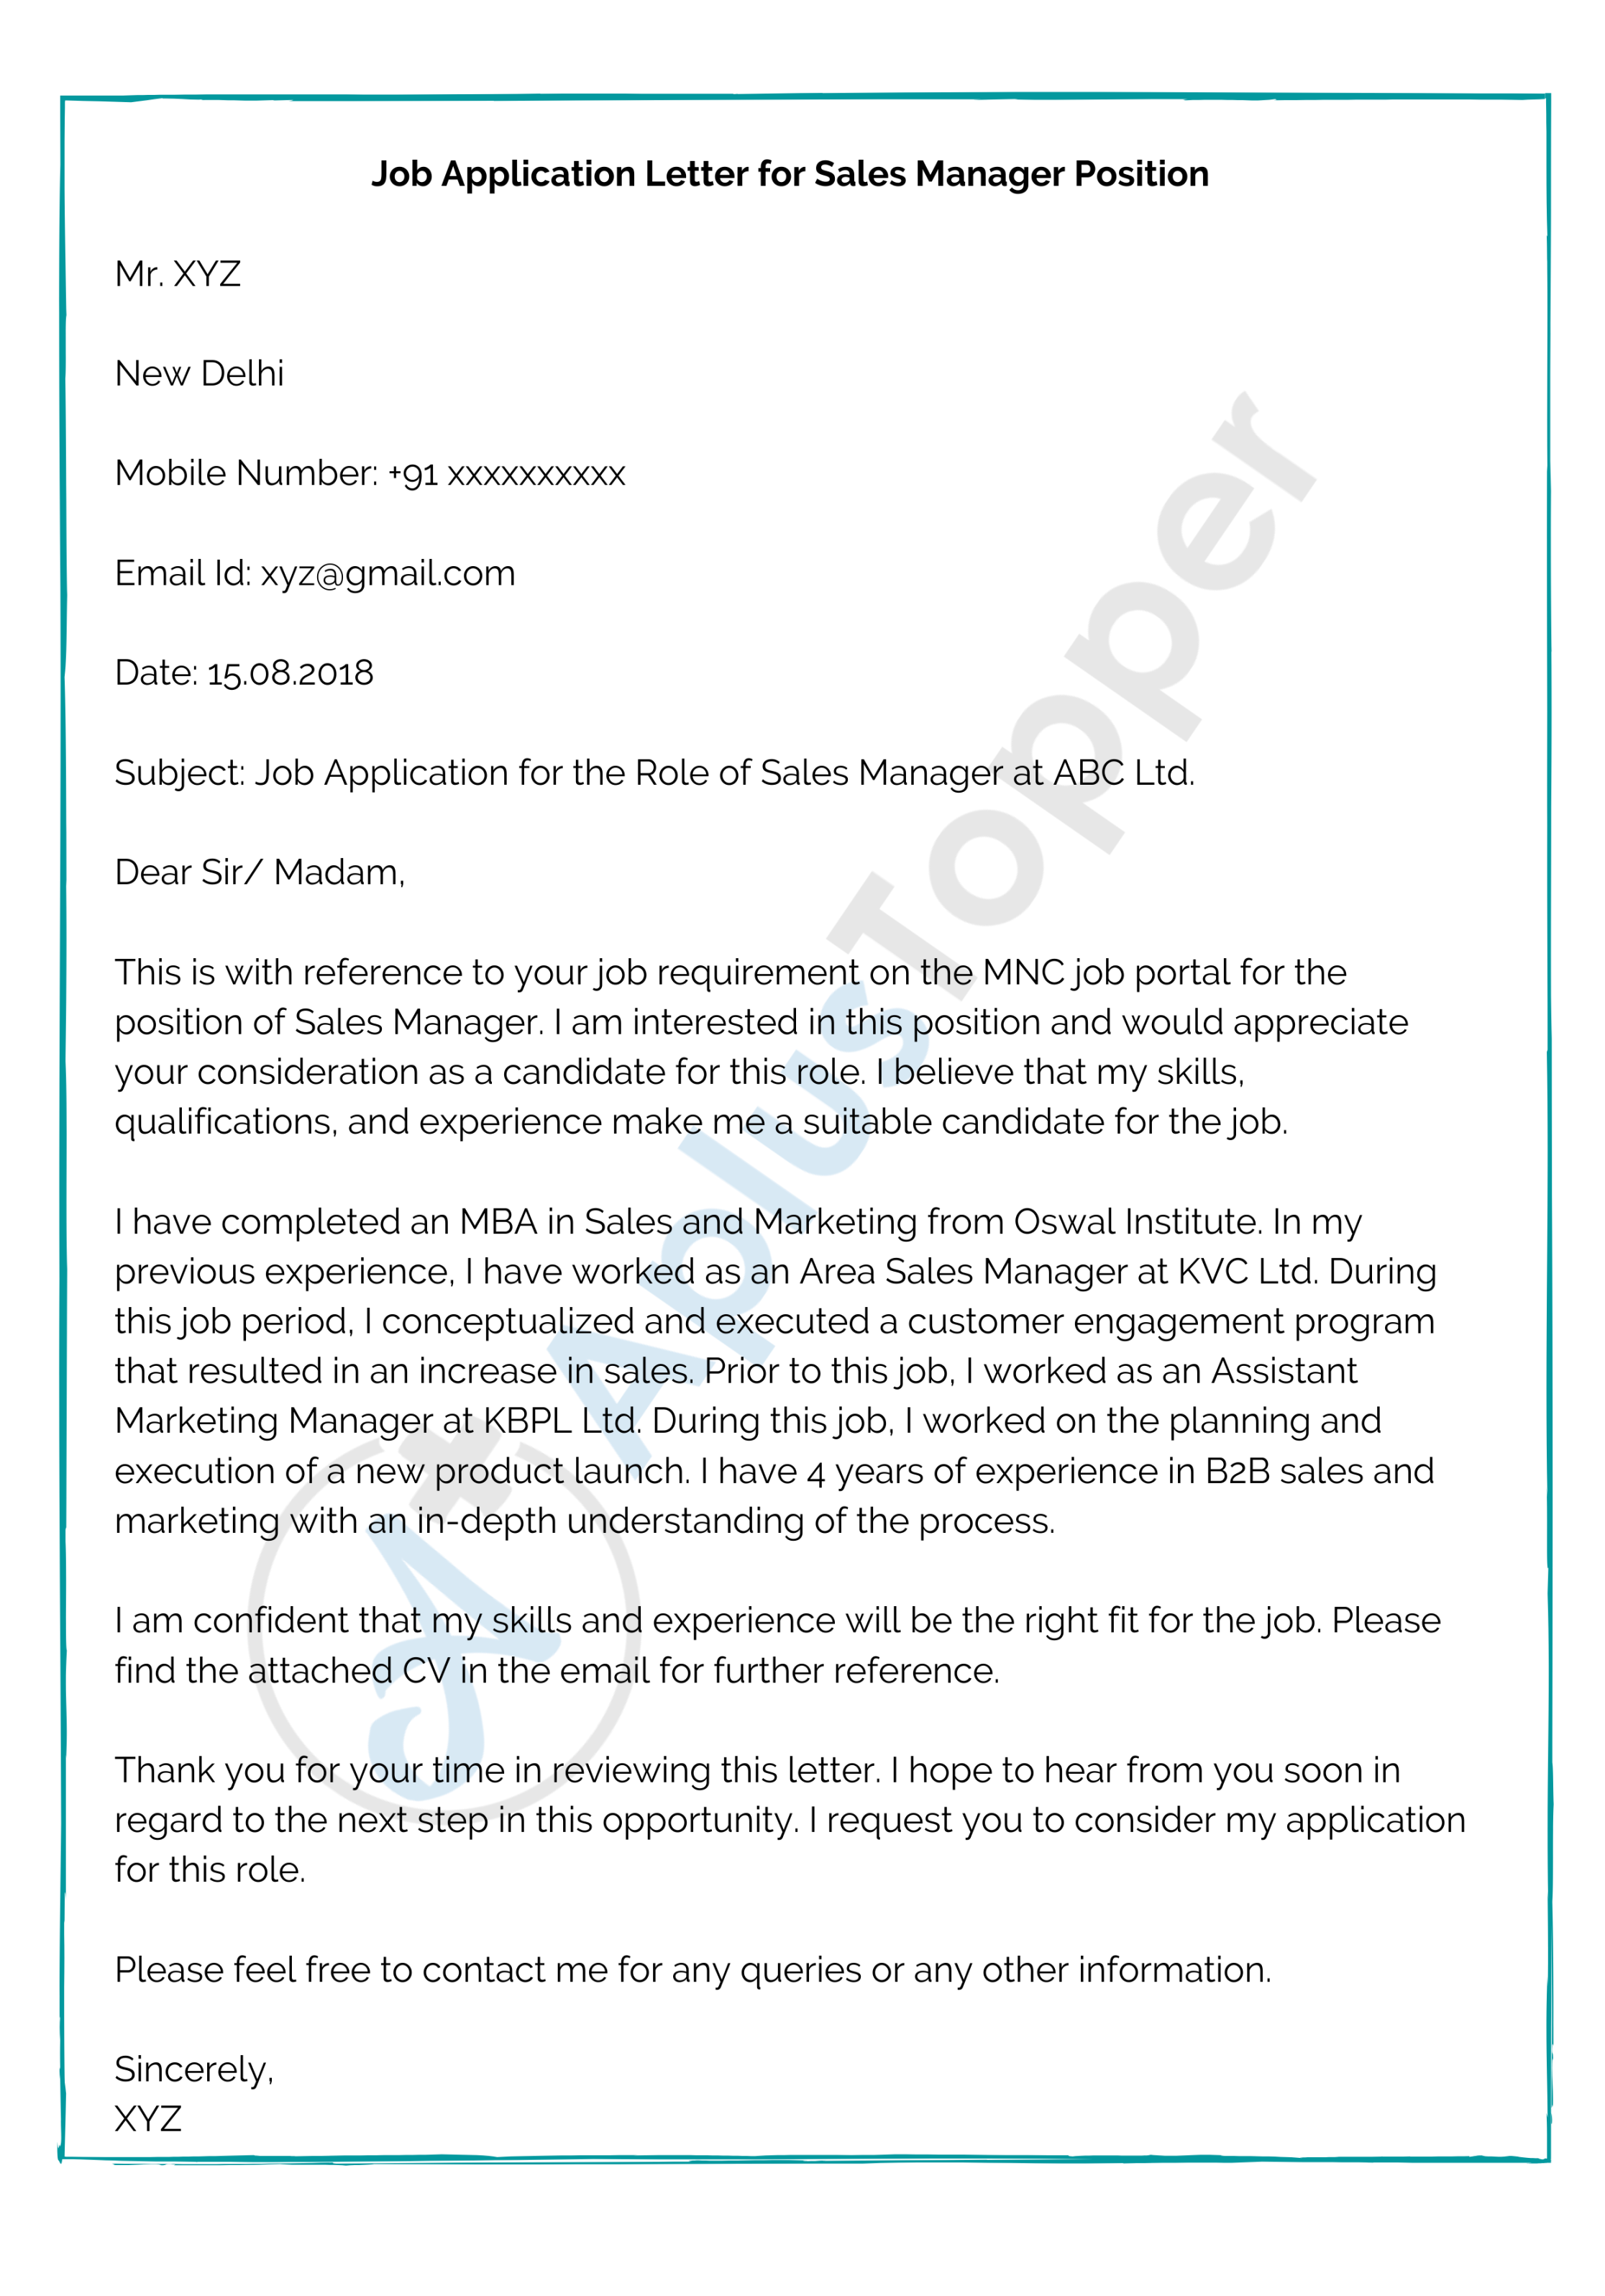 Job Application Letter  Format, Samples, How To Write A Job